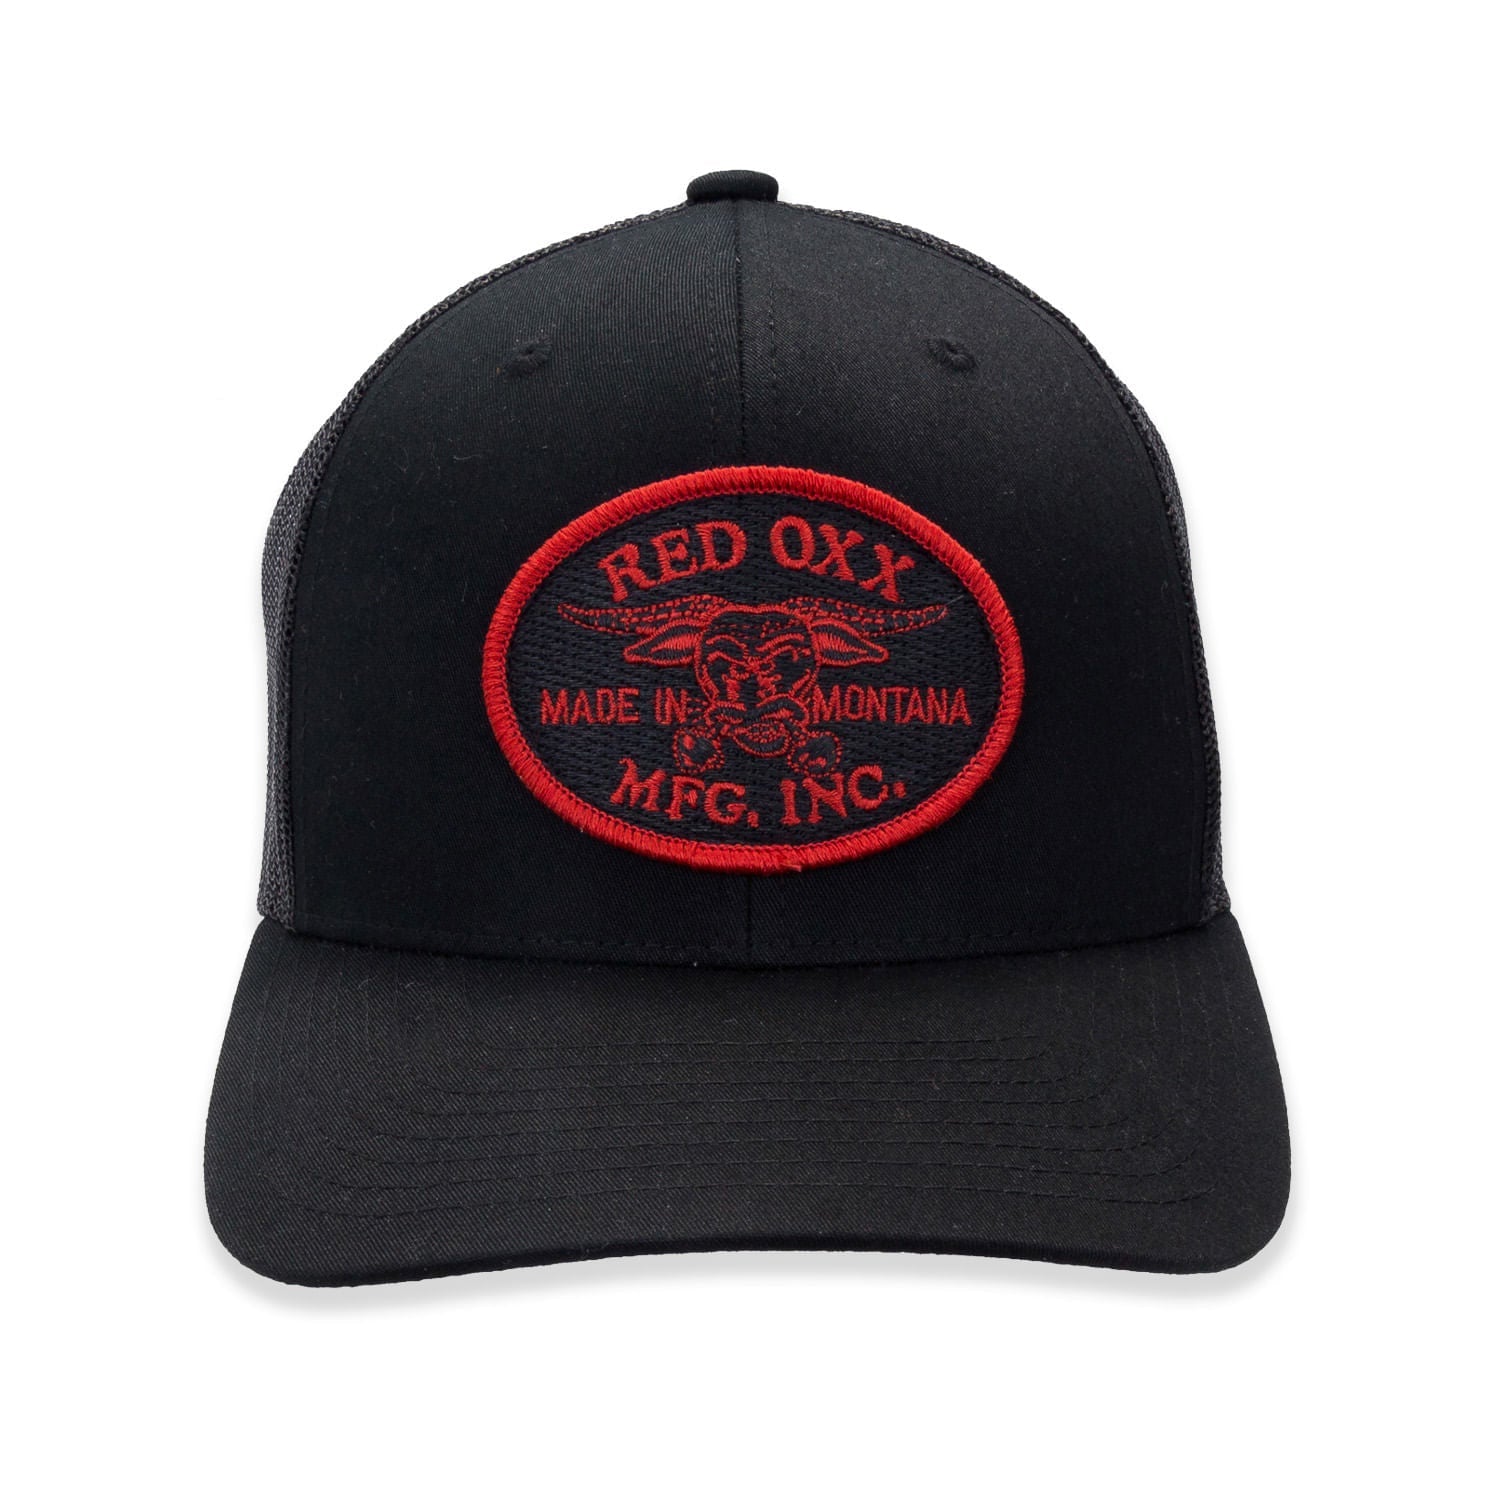 Red Oxx trucker hat with patch logo. 